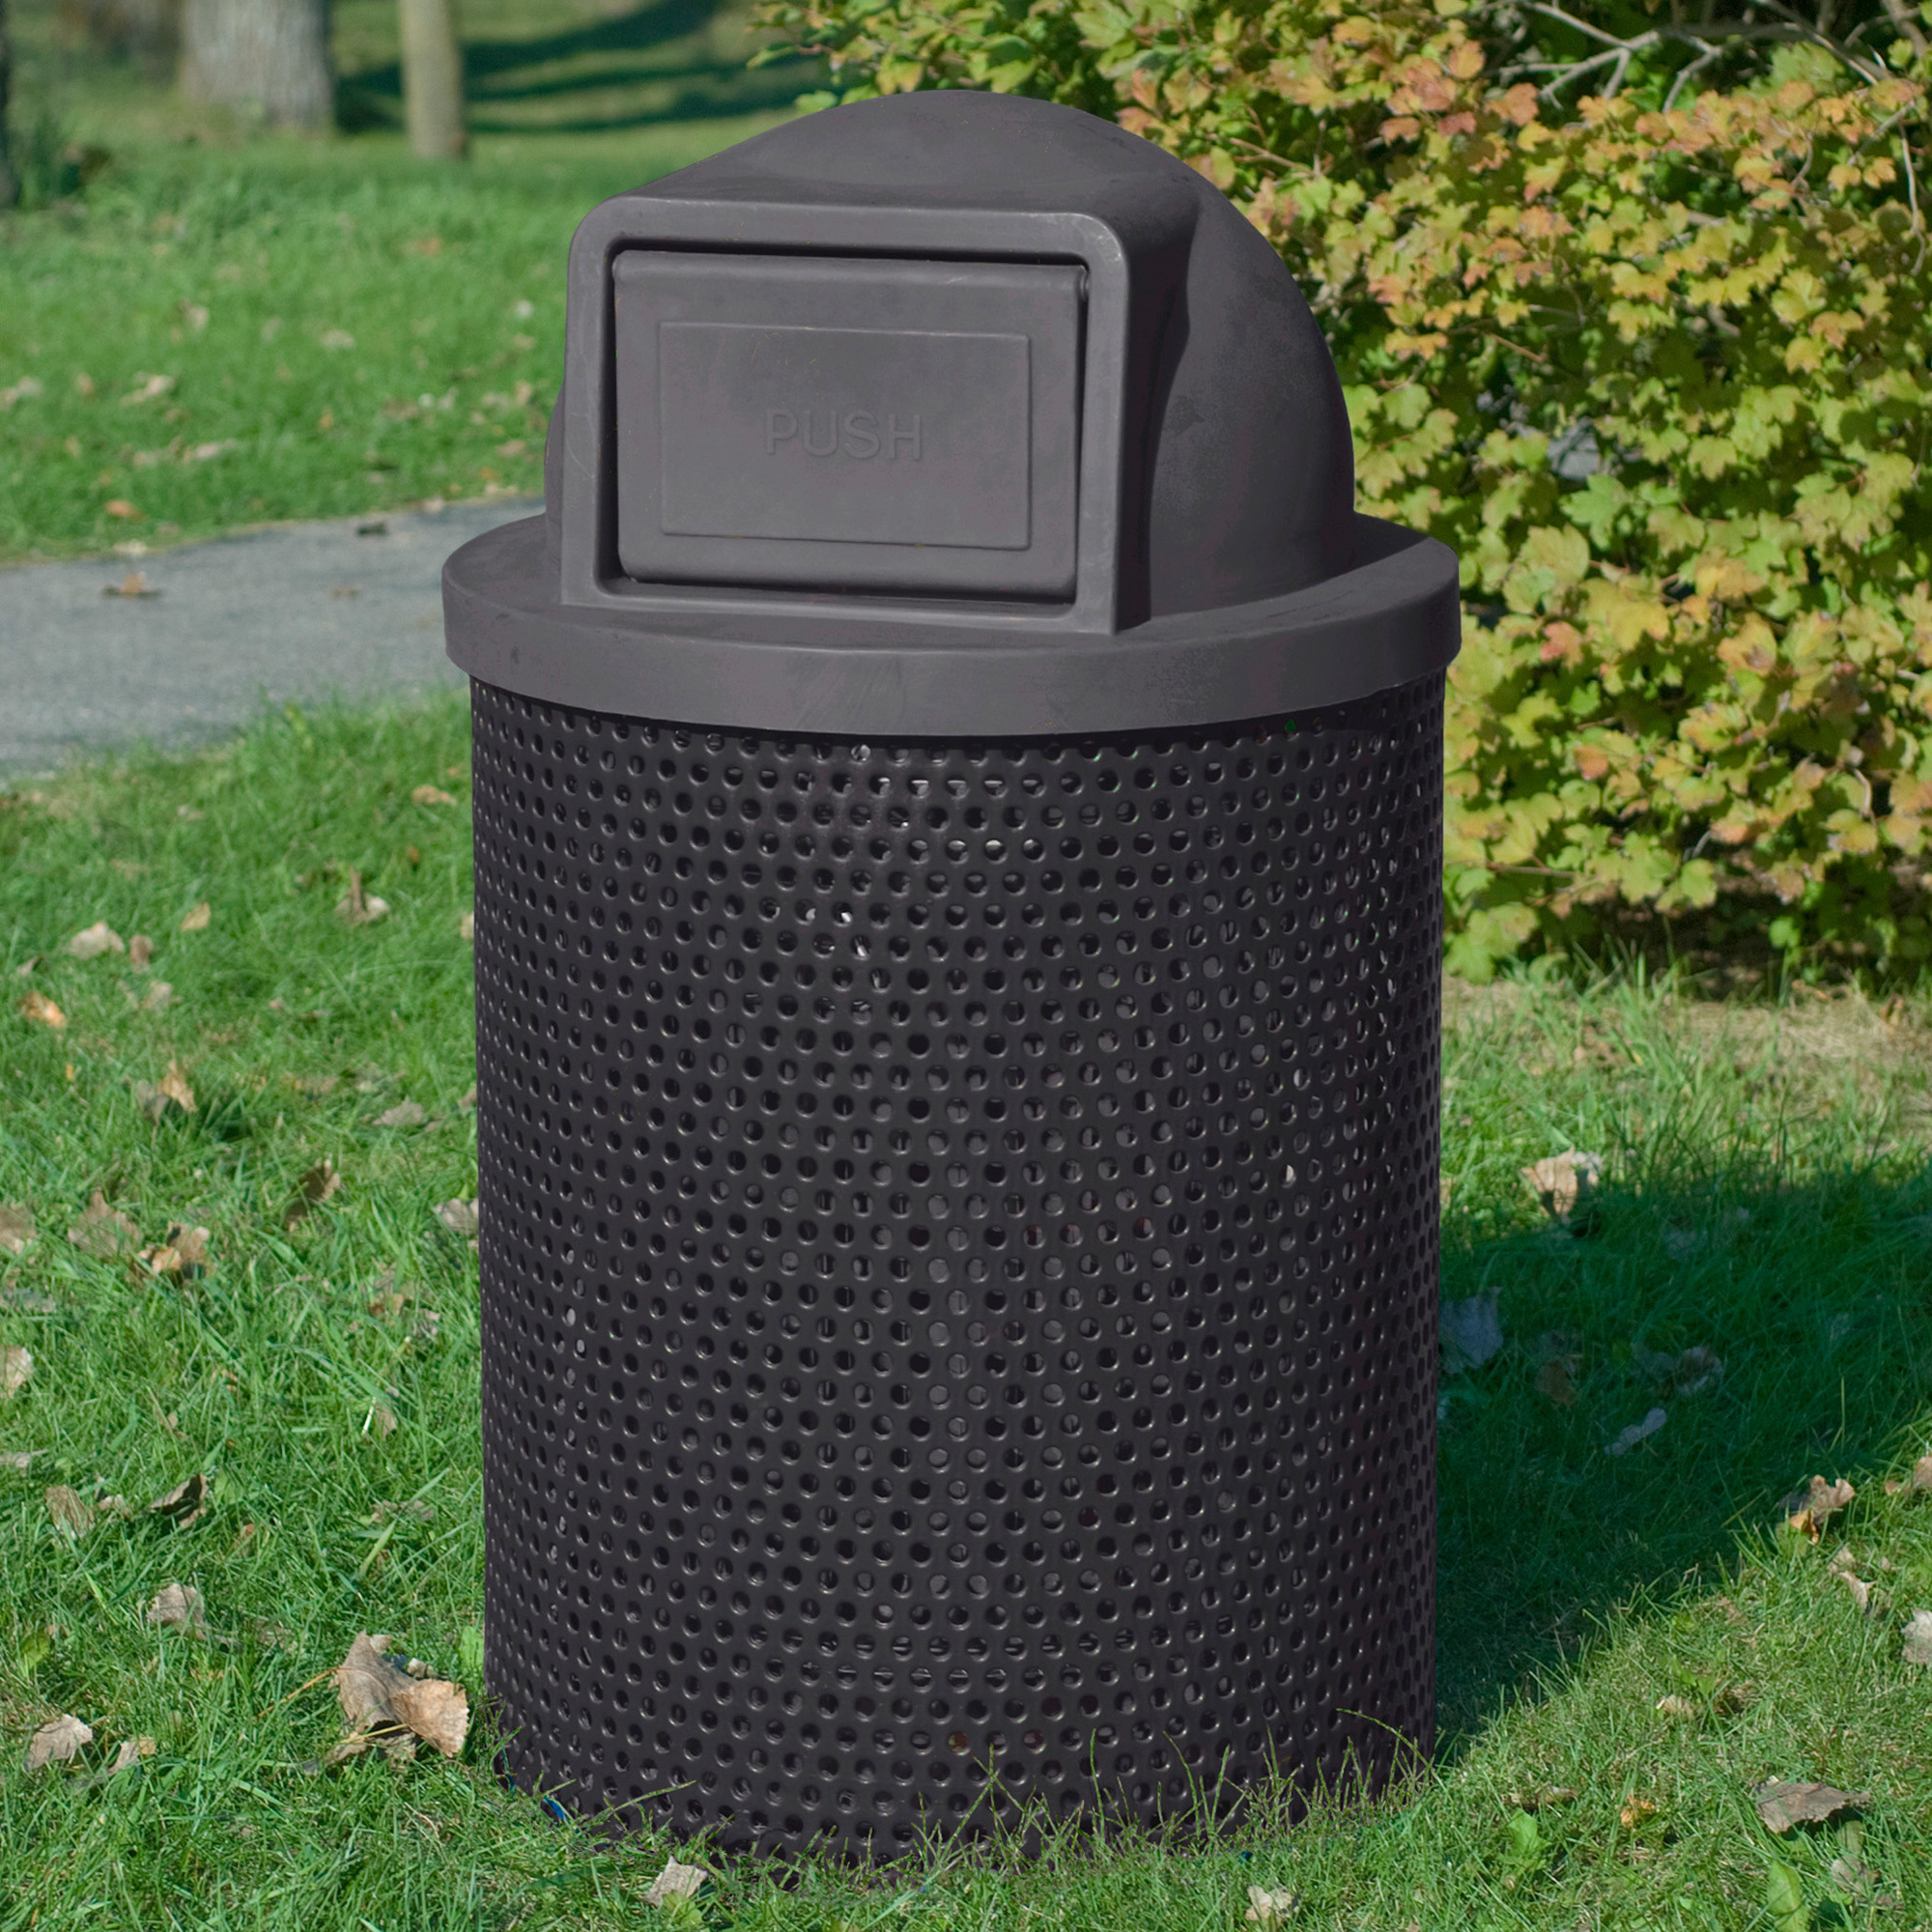 Pilot Rock Round Perforated Steel Trash Receptacle with Plastic Dome Lid â Black, 28Inch Diameter x 42Inch H, Model CN-R/RU-32